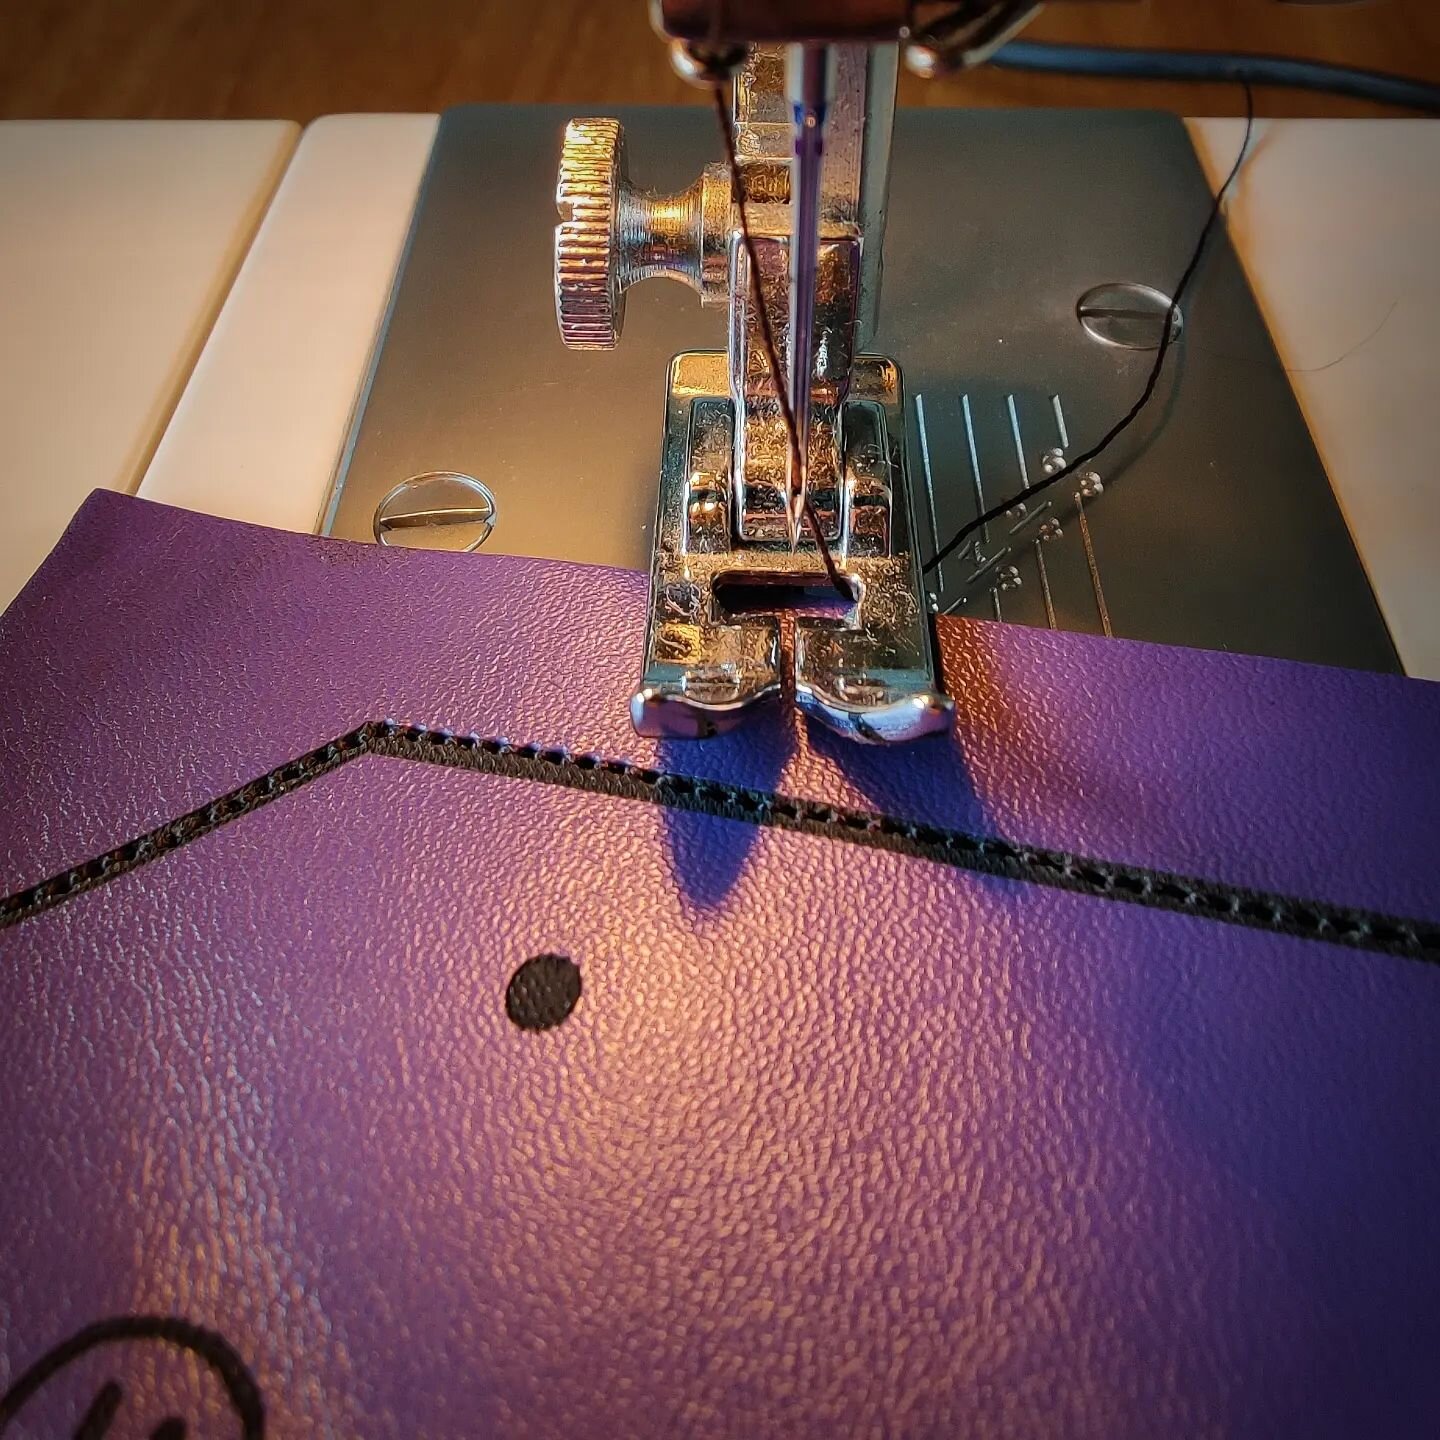 It's never too late to learn a new skill!  Still learning how to make straight stitches, but I've done some 3D printing to help me with that!

Thankfully this 30+ year old machine (courtesy of my Mum) still has life in it and is able to sew through t